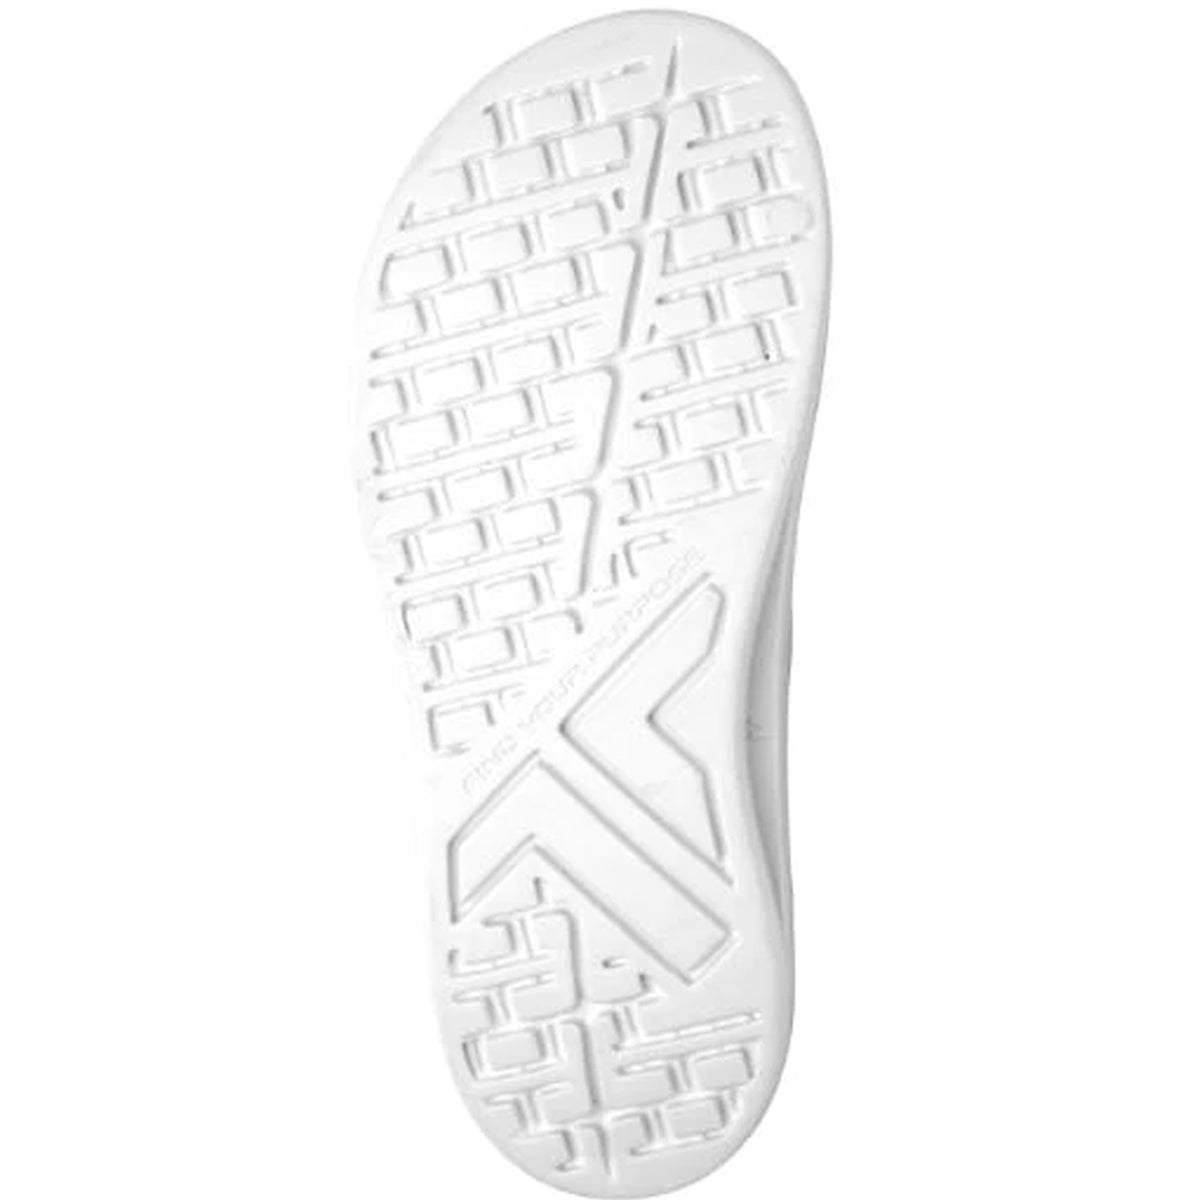 Telic Recharge Arch Support Comfort Slide Sandals - Snow White Telic